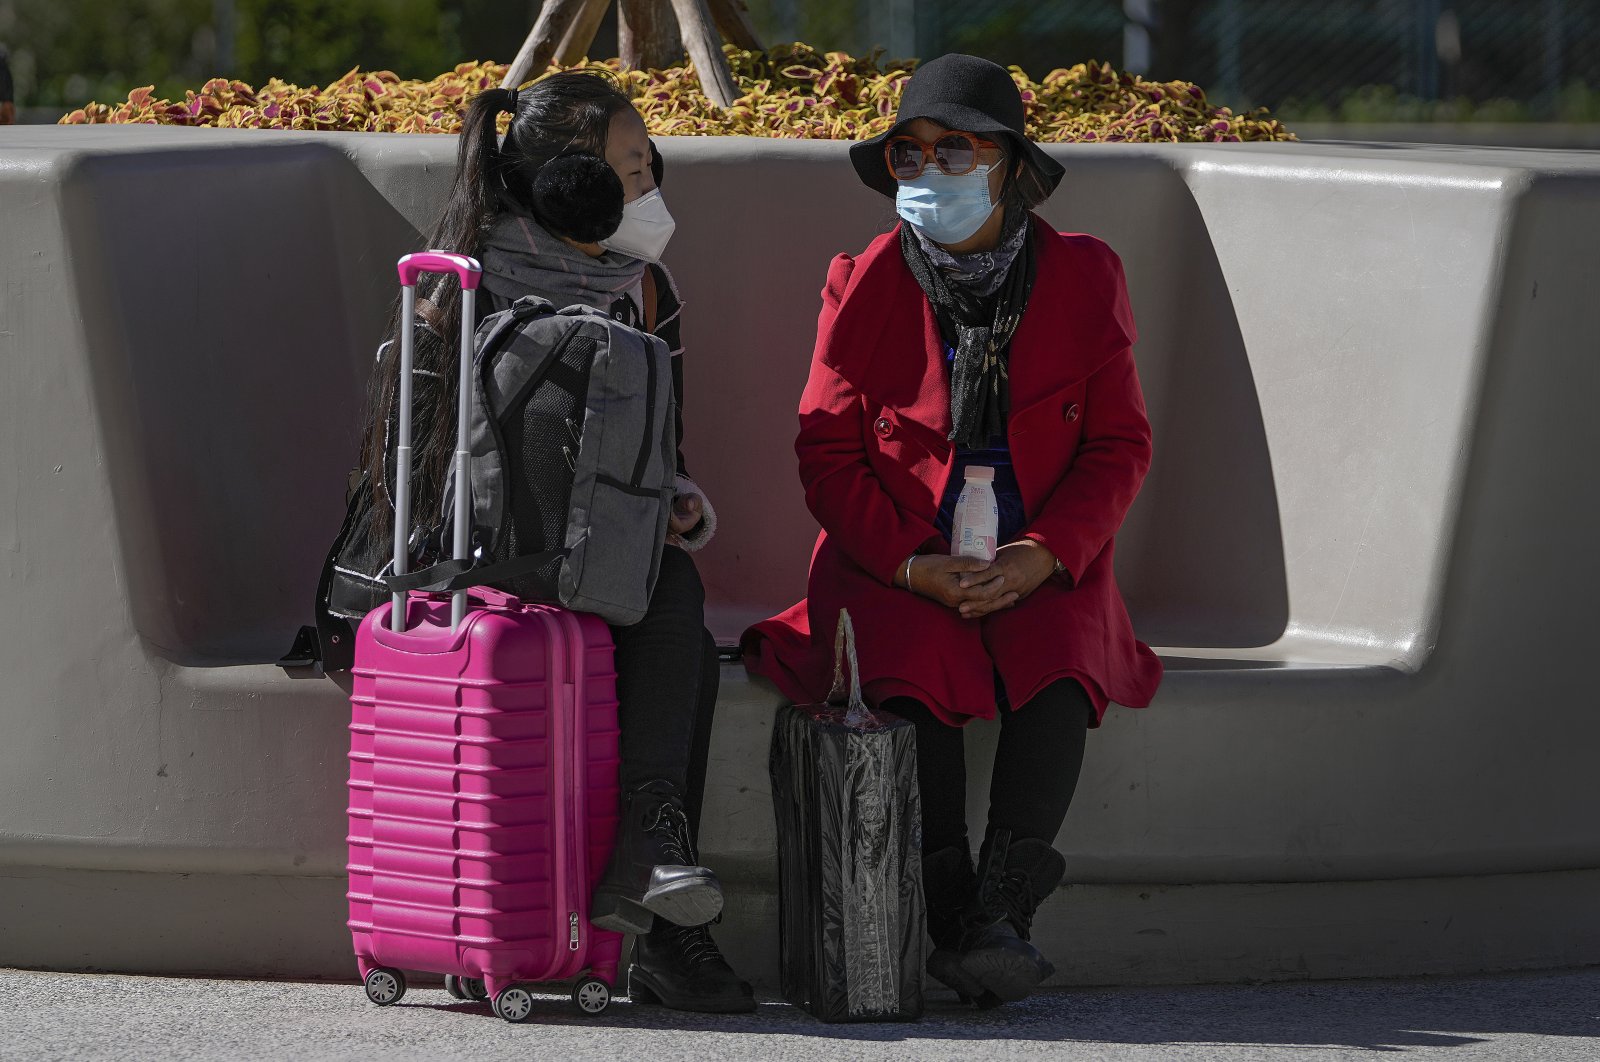 Women wearing face masks to help curb the spread of the coronavirus chat to each other on a bench outside a shopping mall in Beijing, China, Oct. 21, 2021. (AP Photo)